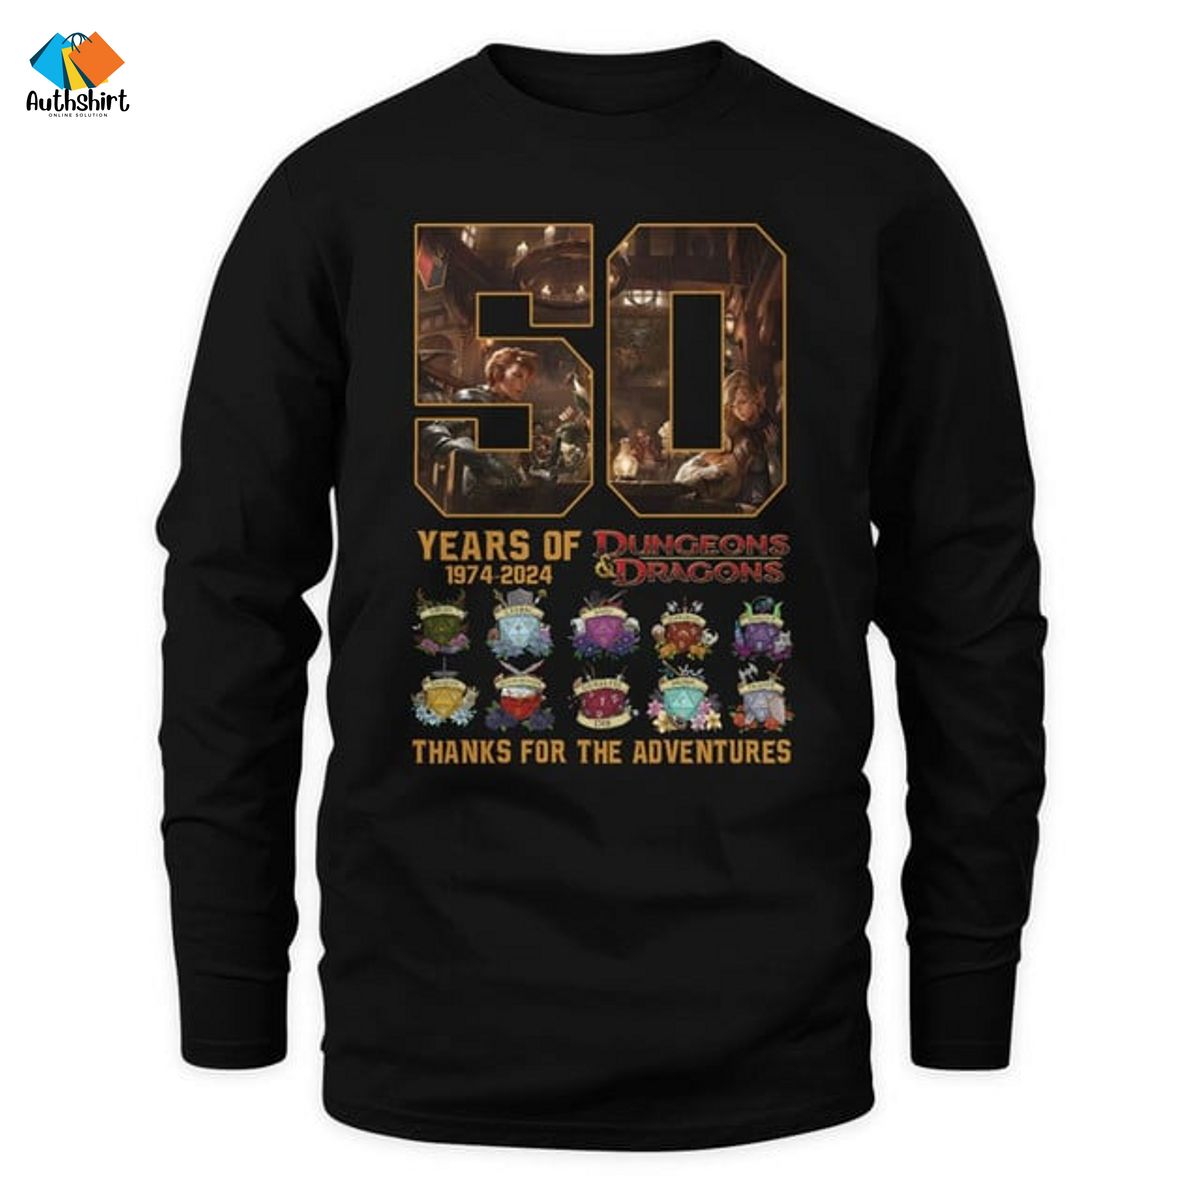 50 Years Of Dungeons And Dragons Thanks For The Adventures Shirt